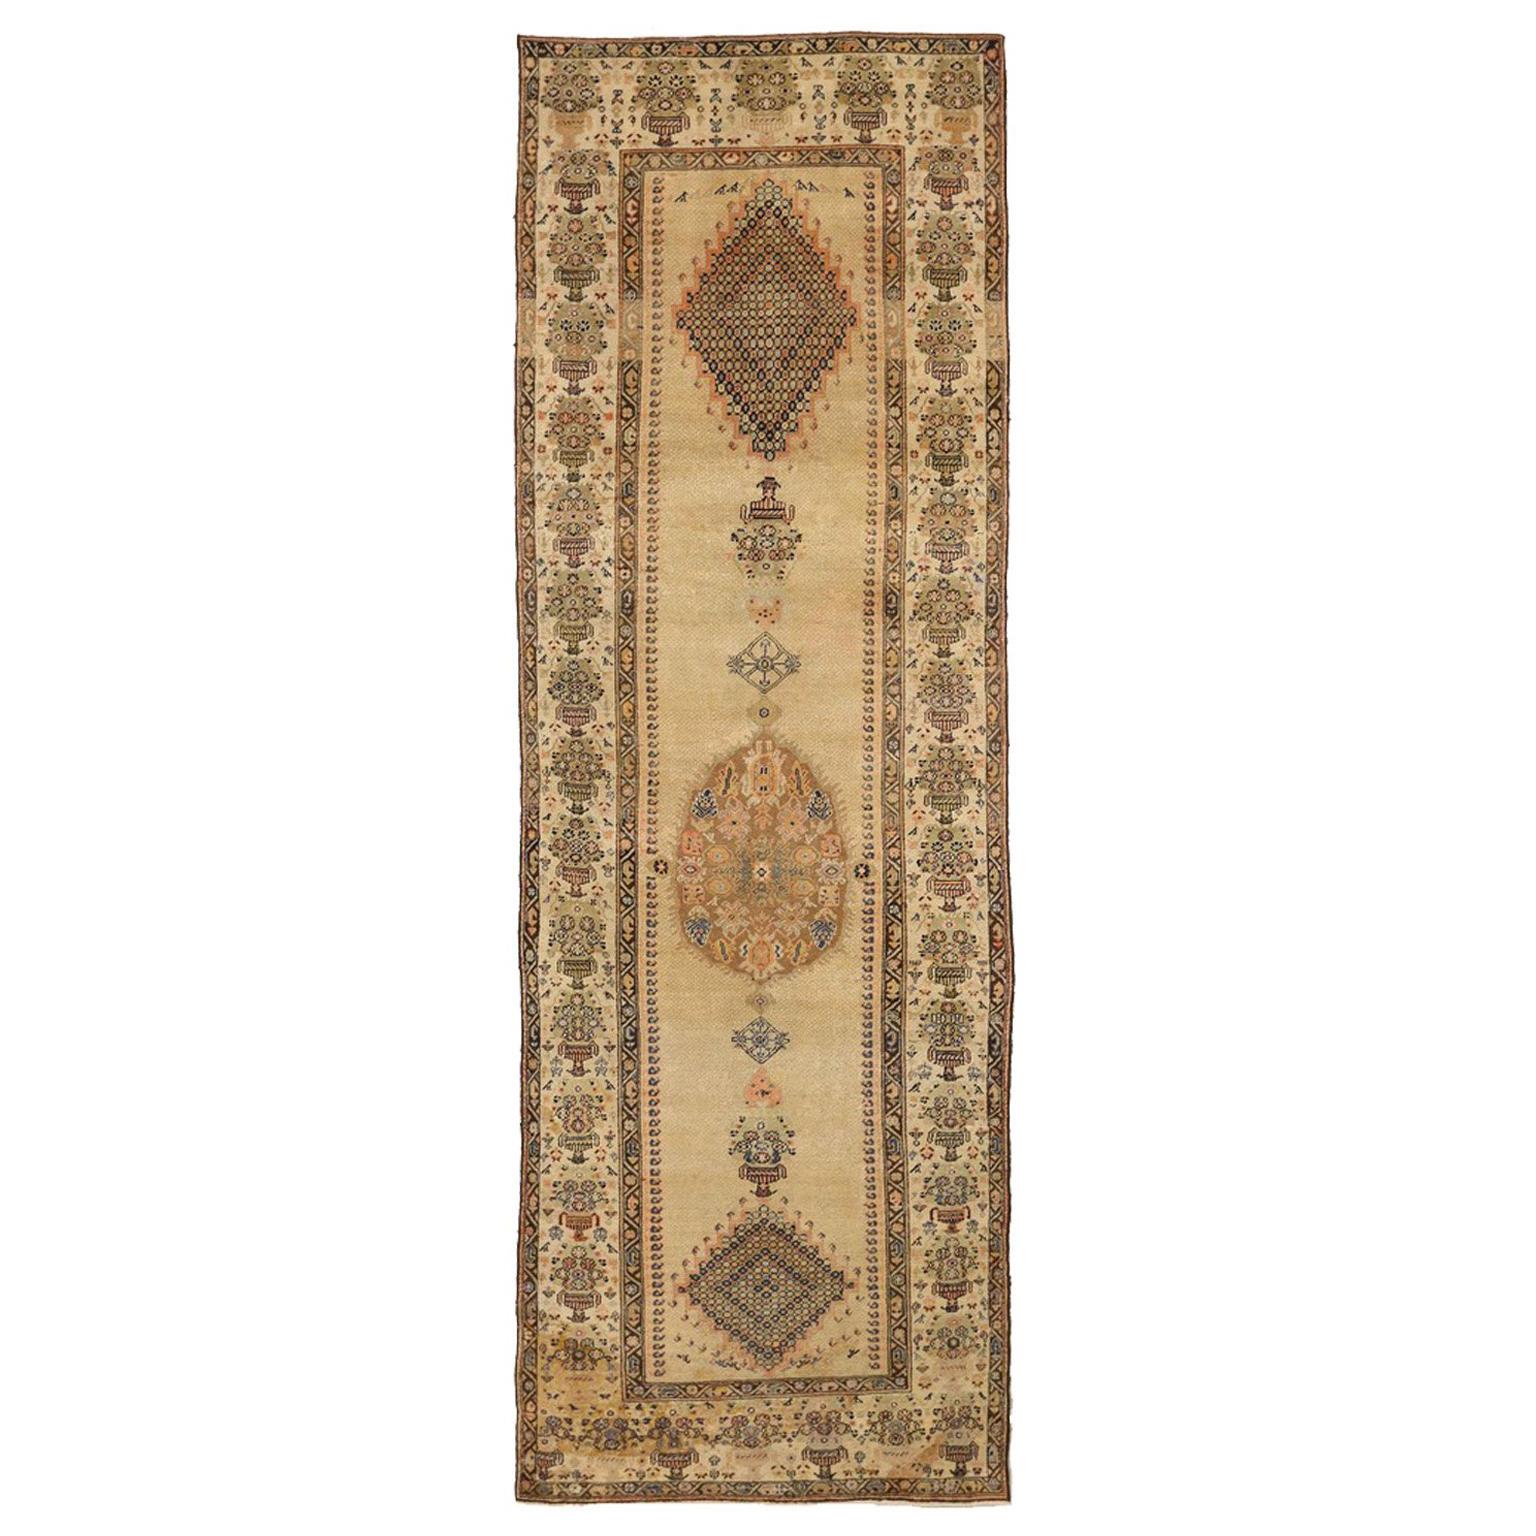 Antique Persian Rug in Sarab Design with Vivid Border Details, circa 1910s For Sale